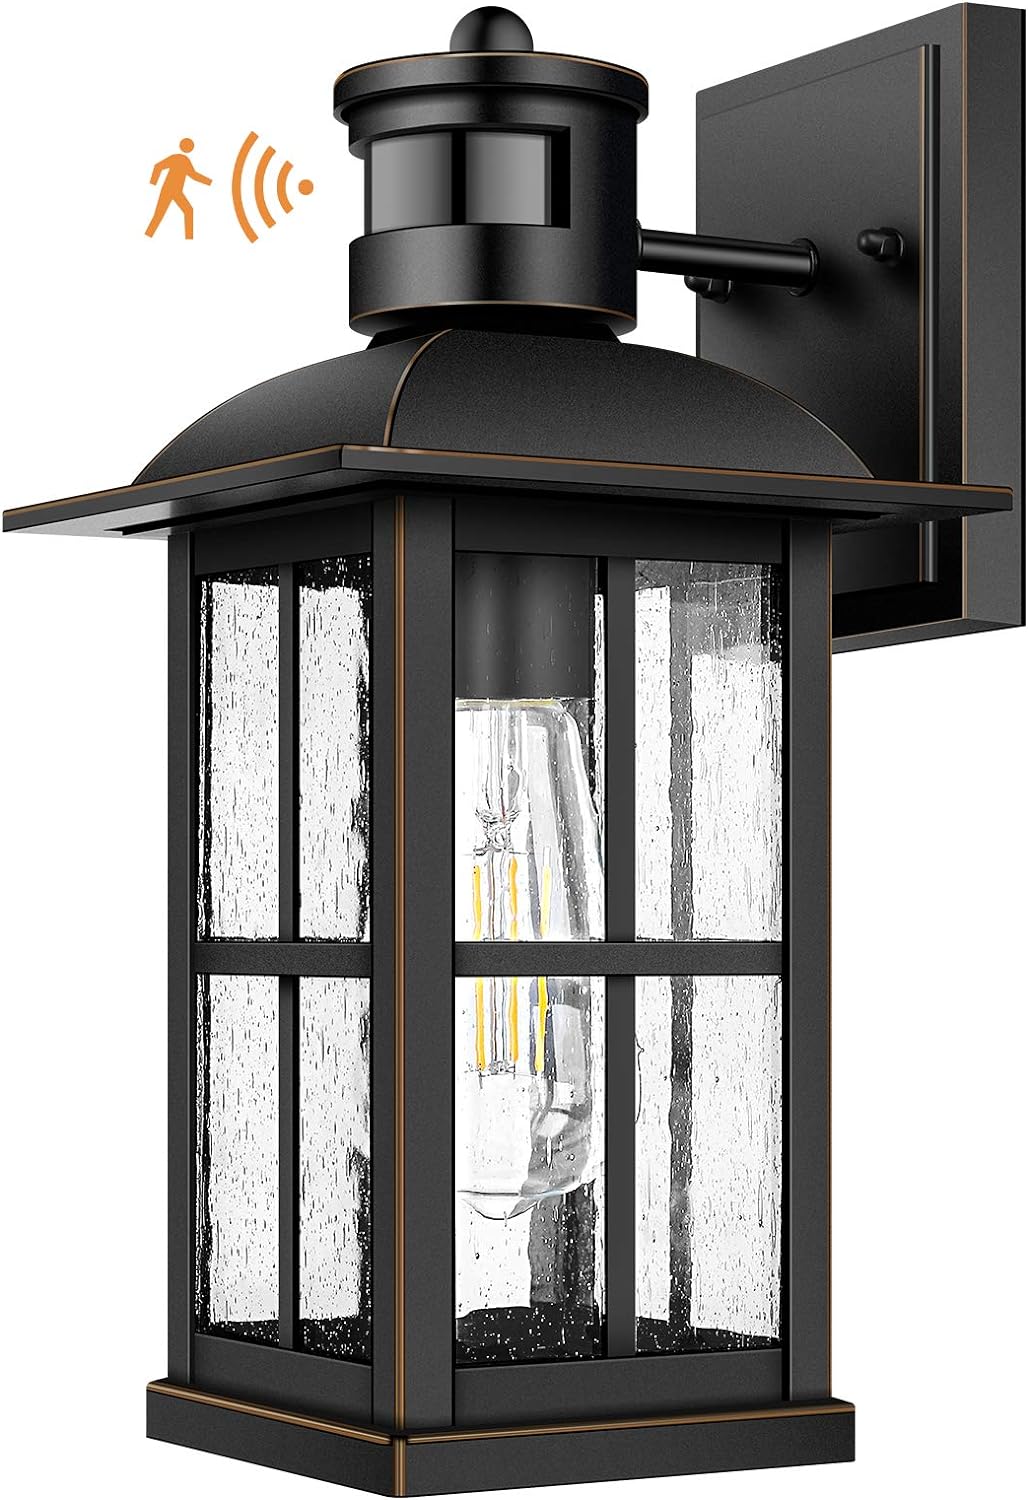 Matte Black Wall Sconce with Clear Glass for Doorway 100% Anti-Rust Aluminum Exterior Light Fixture Wall Mount Waterproof Porch Light Bulbs not Included 2-Pack Dusk to Dawn Outdoor Wall Lantern